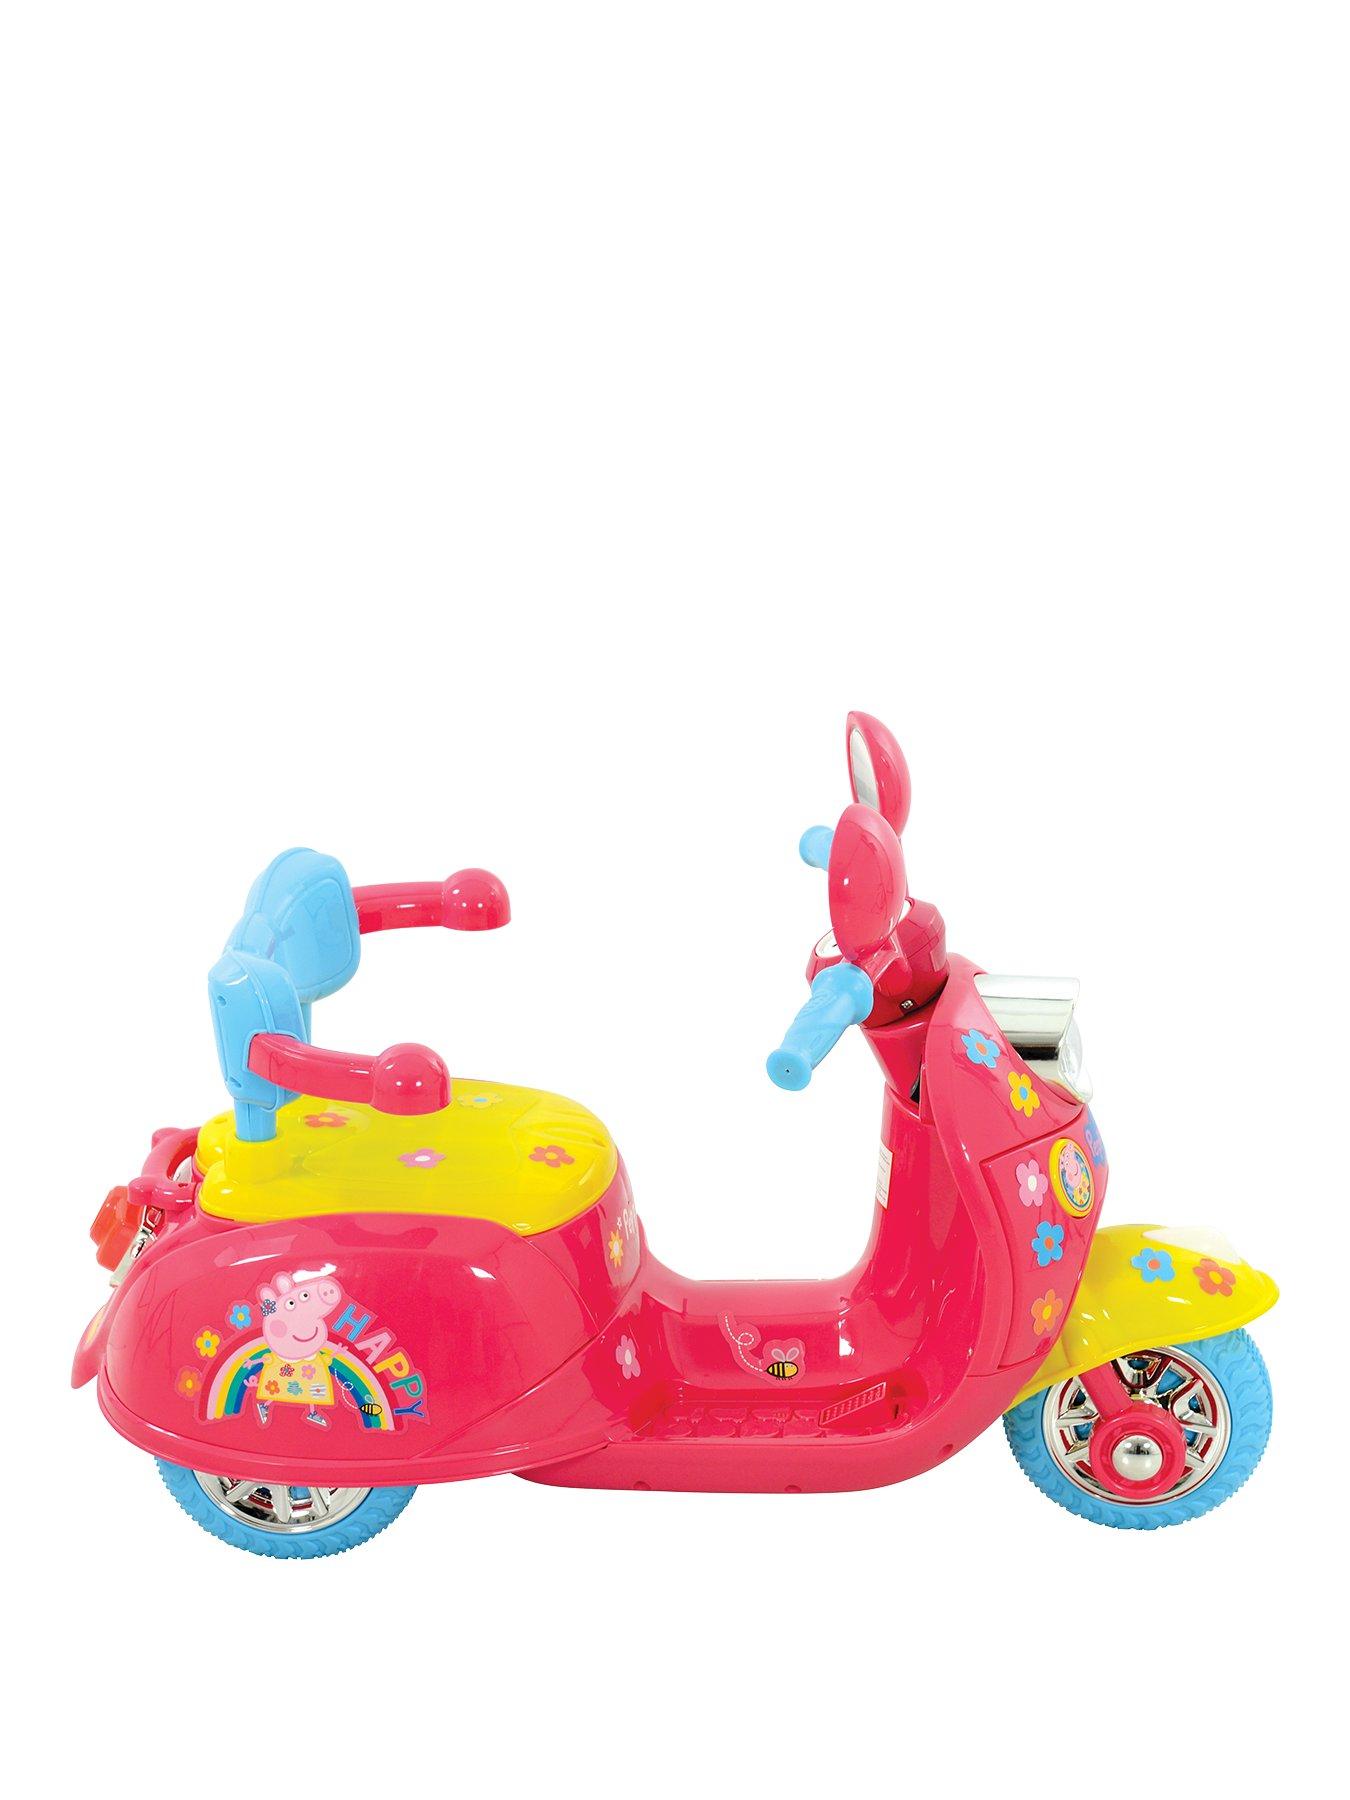 peppa pig battery operated car 6 volt